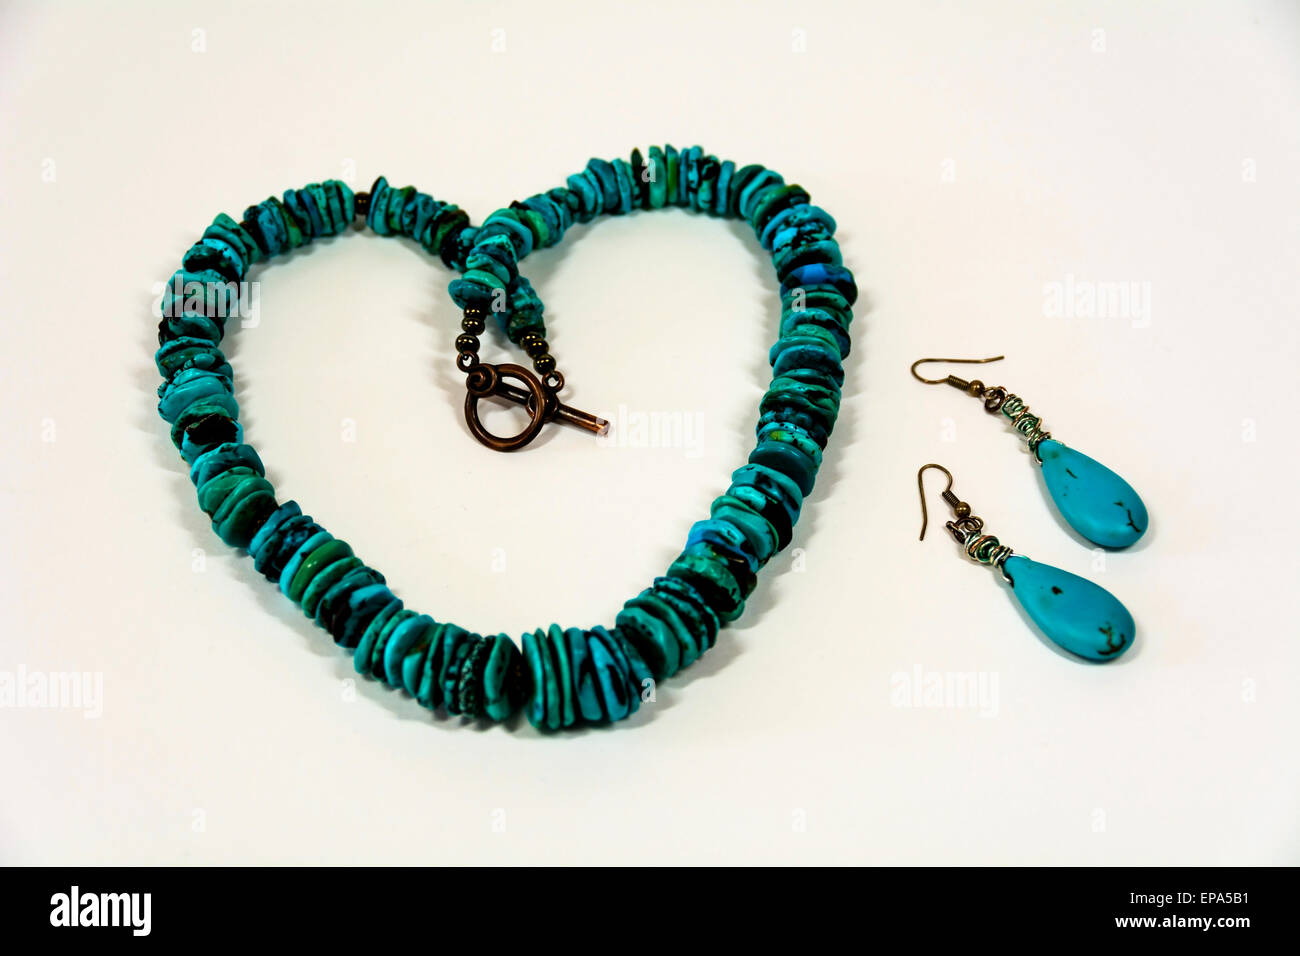 Flat round polished turquoise stones strung together to form a beautifully colourful necklace and turquoise drop earrings. Stock Photo